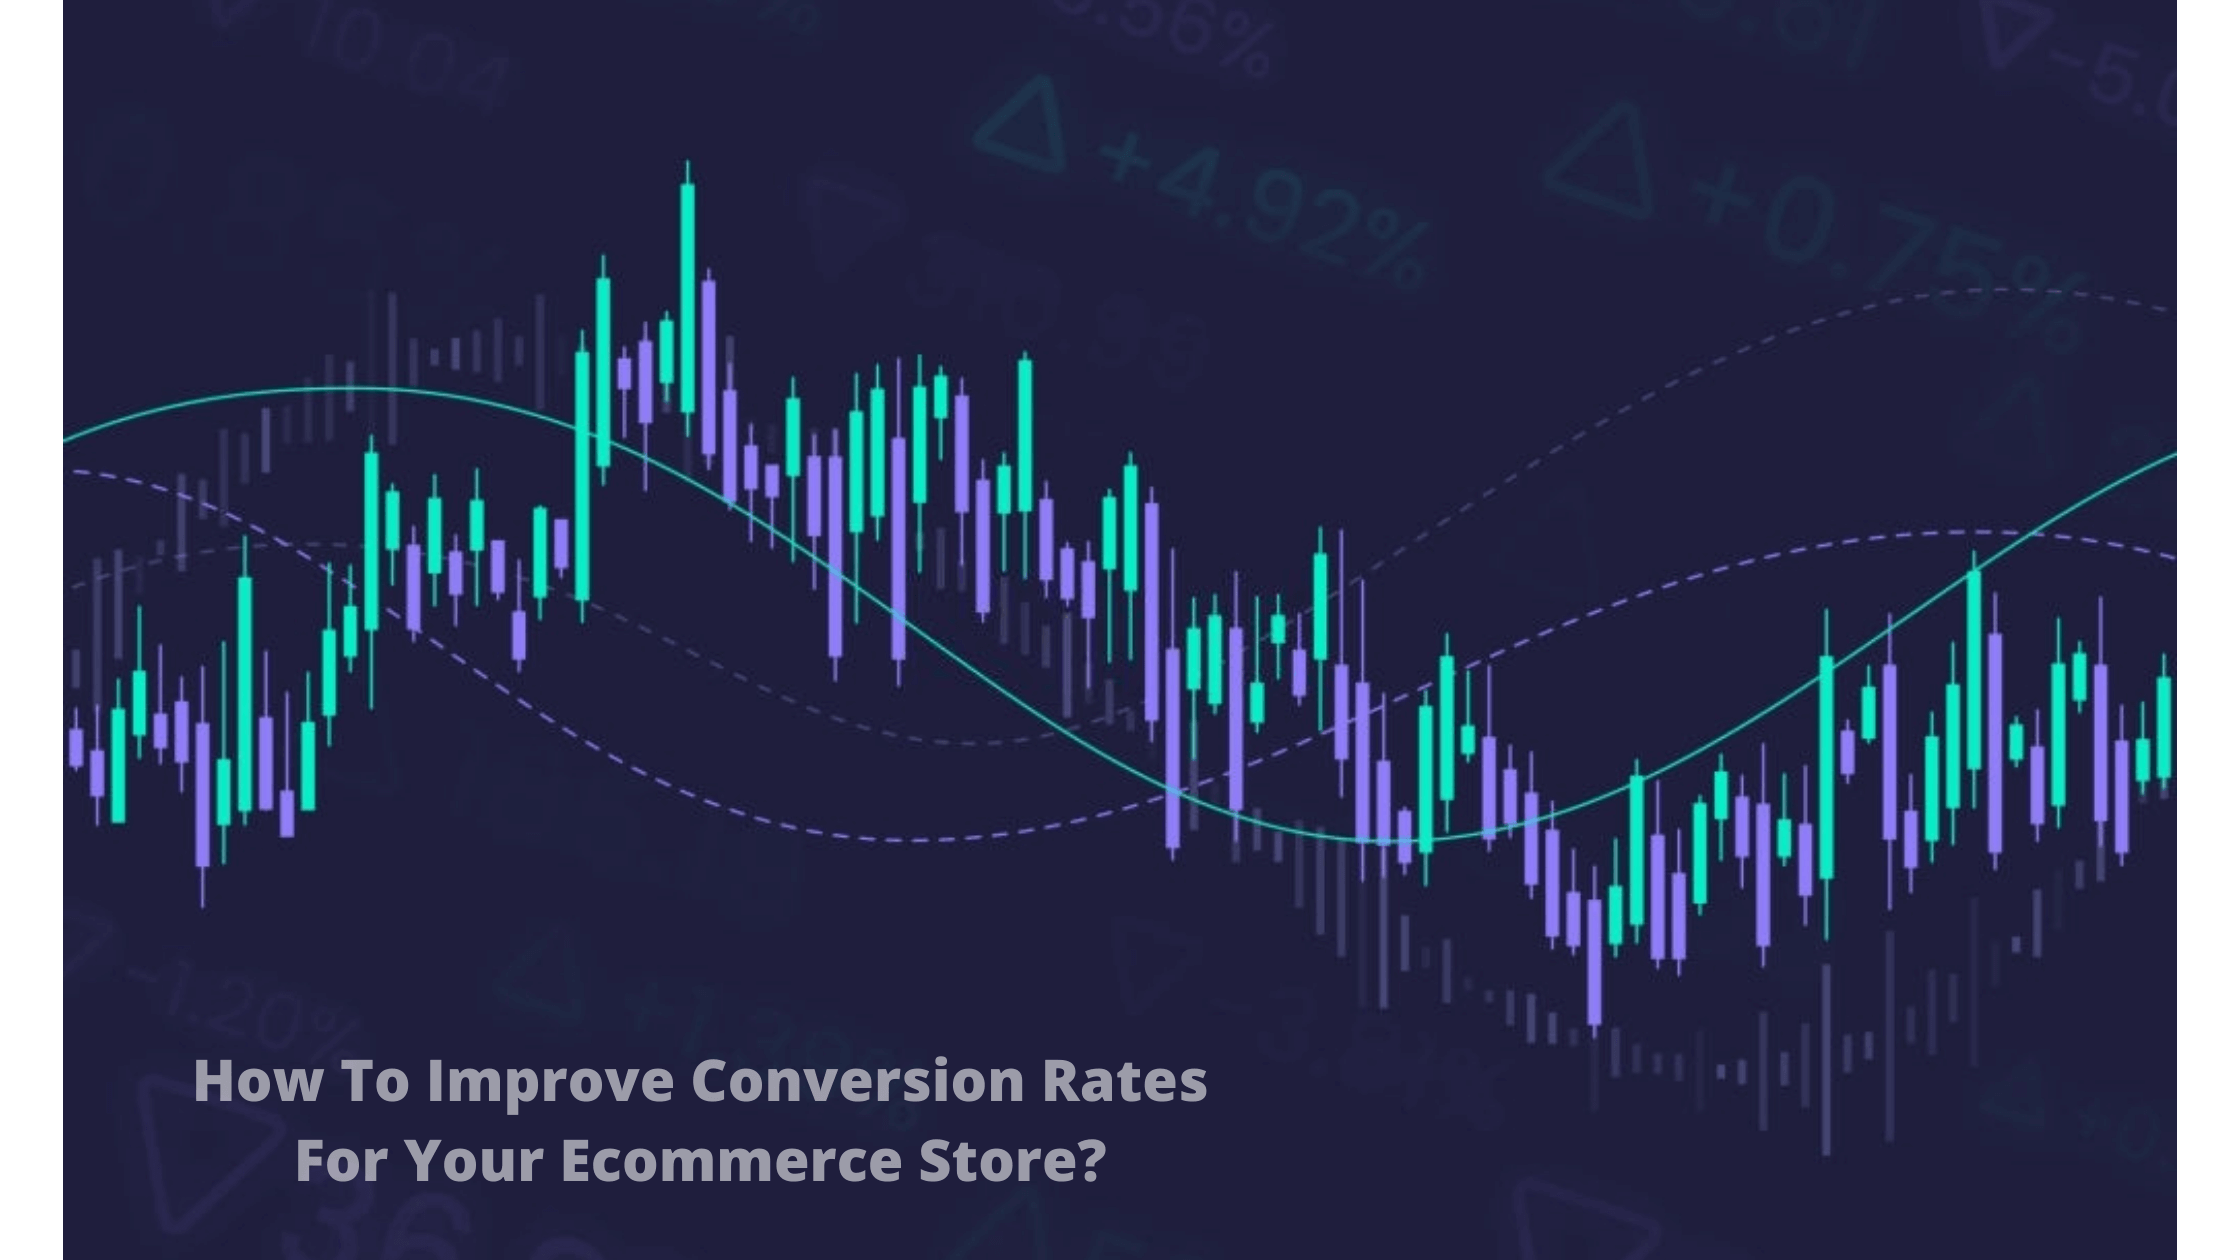 Improve Conversion Rates For Your Ecommerce Store